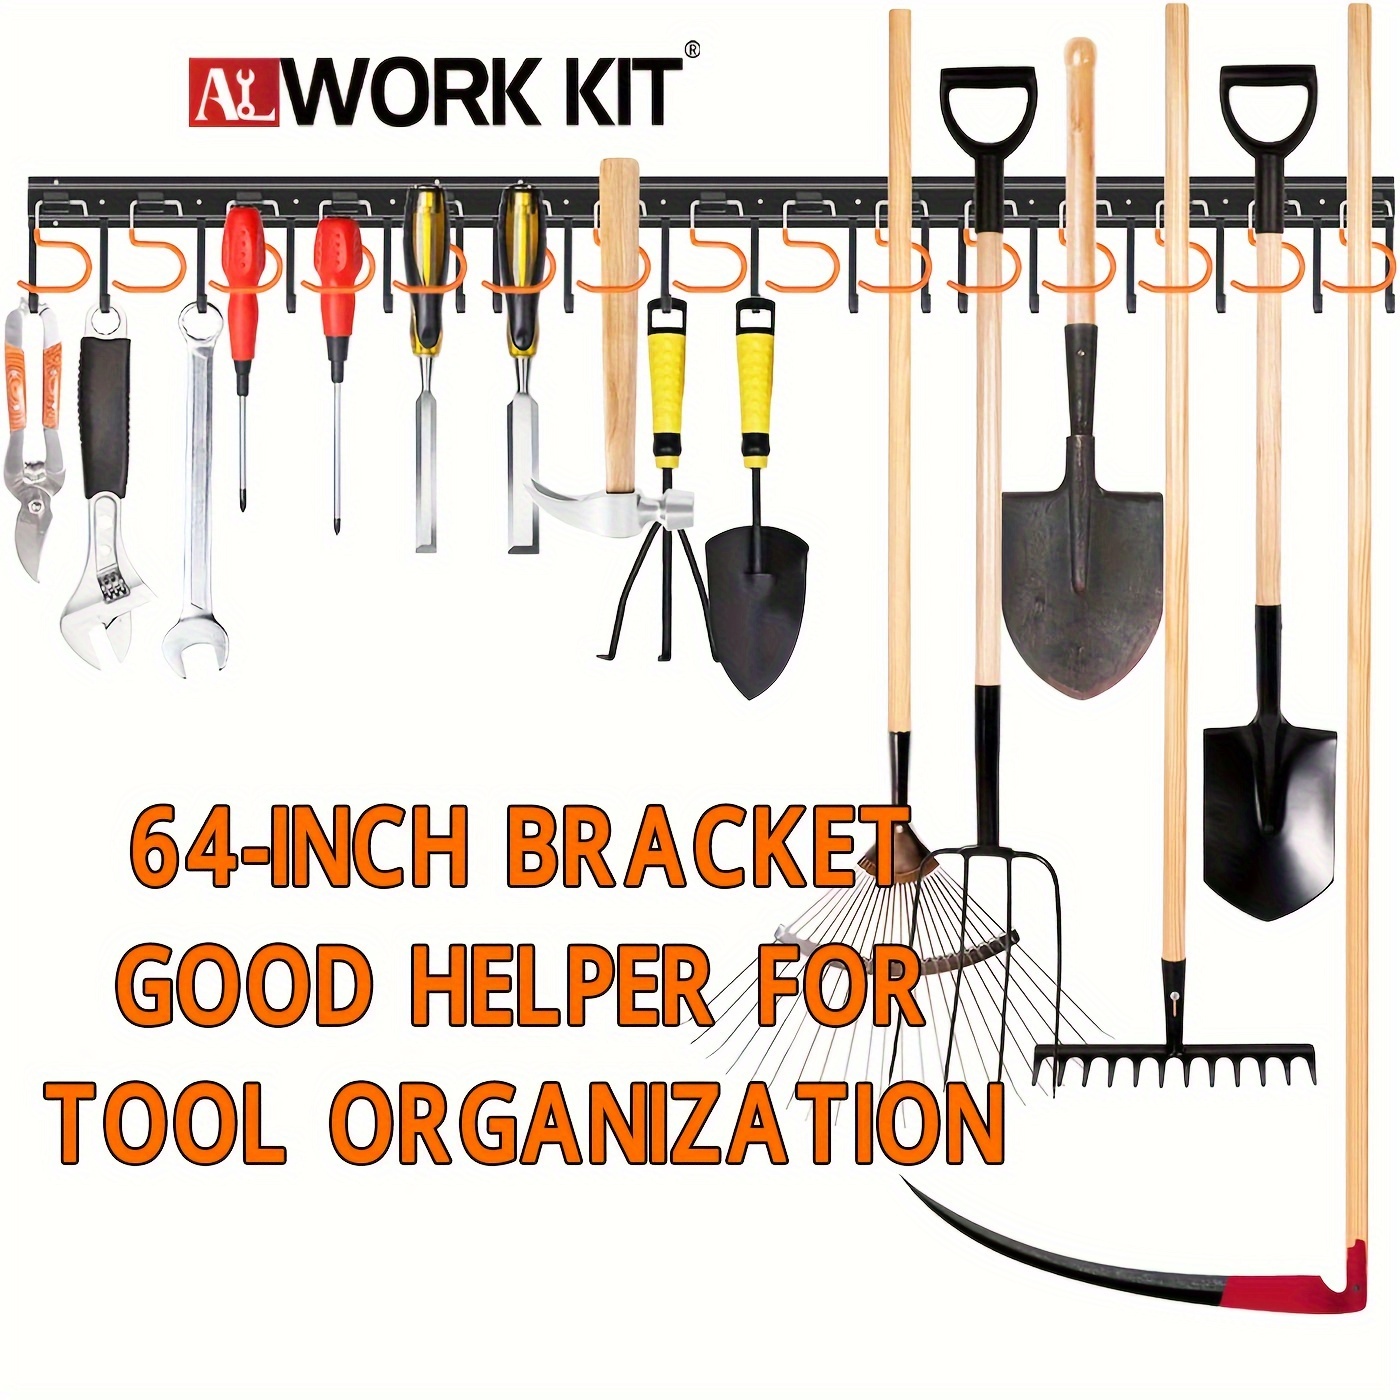 

20pcs Adjustable Tool Organizer With Heavy Duty Hooks, Wall Mount Tool Hangers For Garage Wall, Shed, Garden Etc. Men Gifts, Garage Supplies, Garage Organization And Storage Supplies